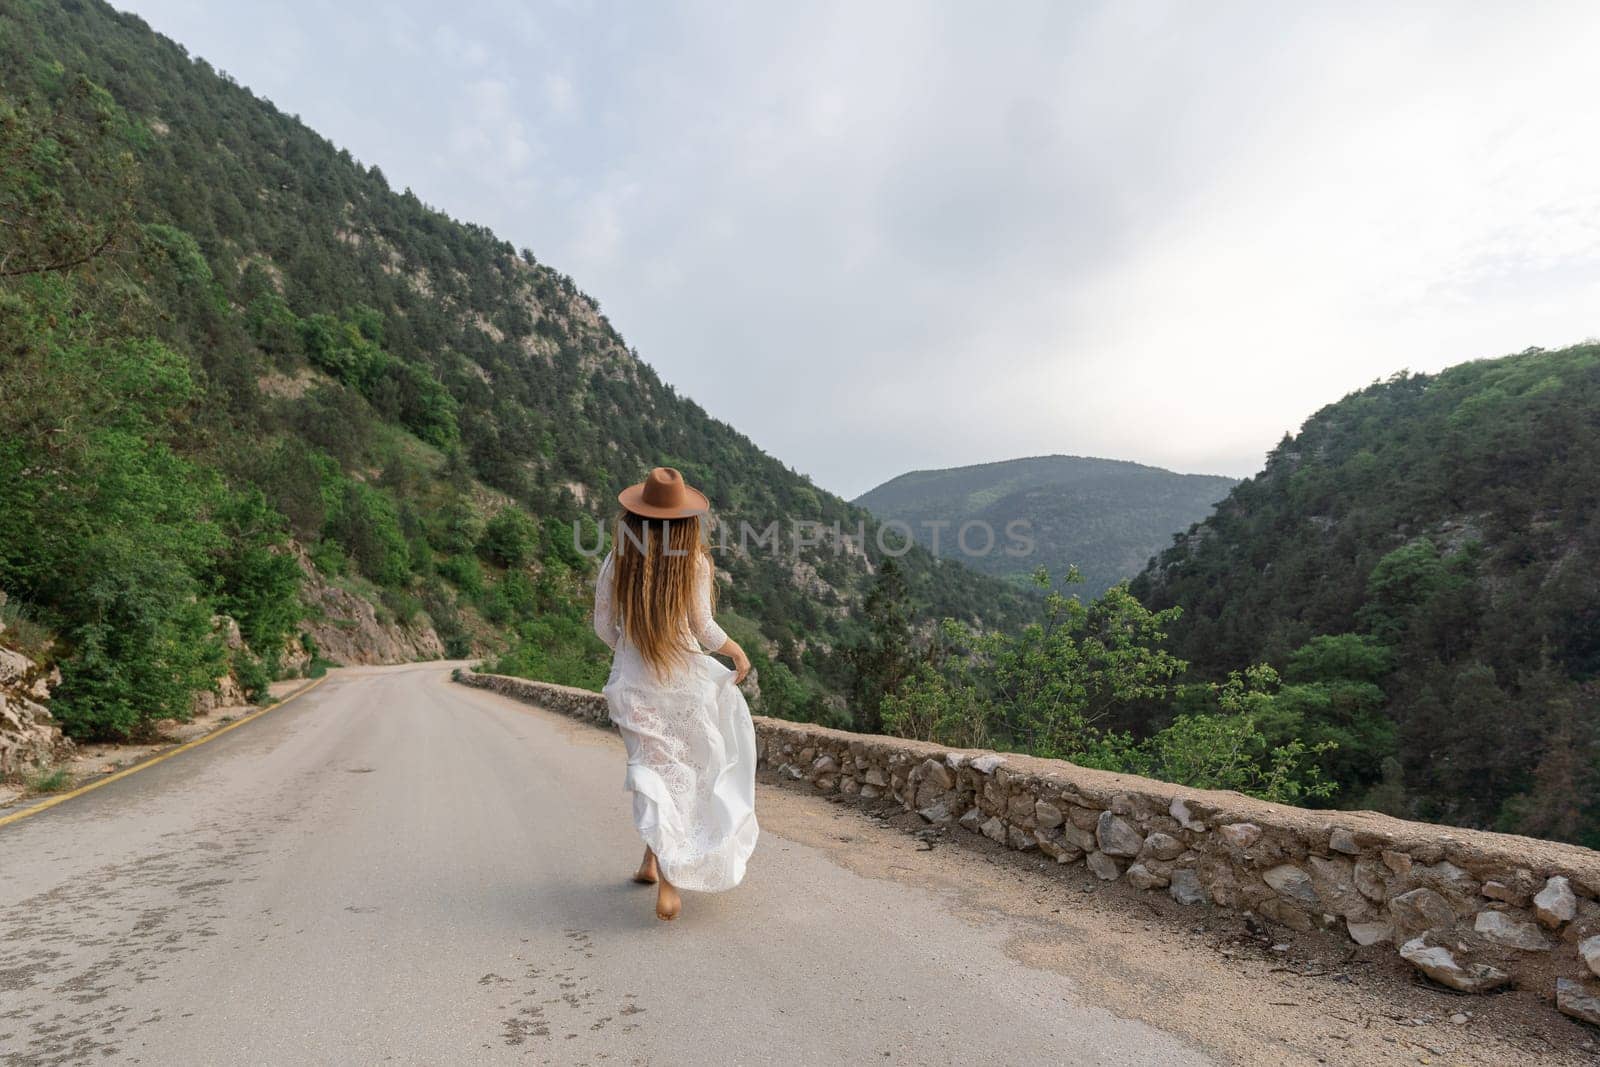 A woman in a white dress is walking down a road with a hat on. The road is surrounded by mountains and the sky is cloudy. The scene has a peaceful and serene mood